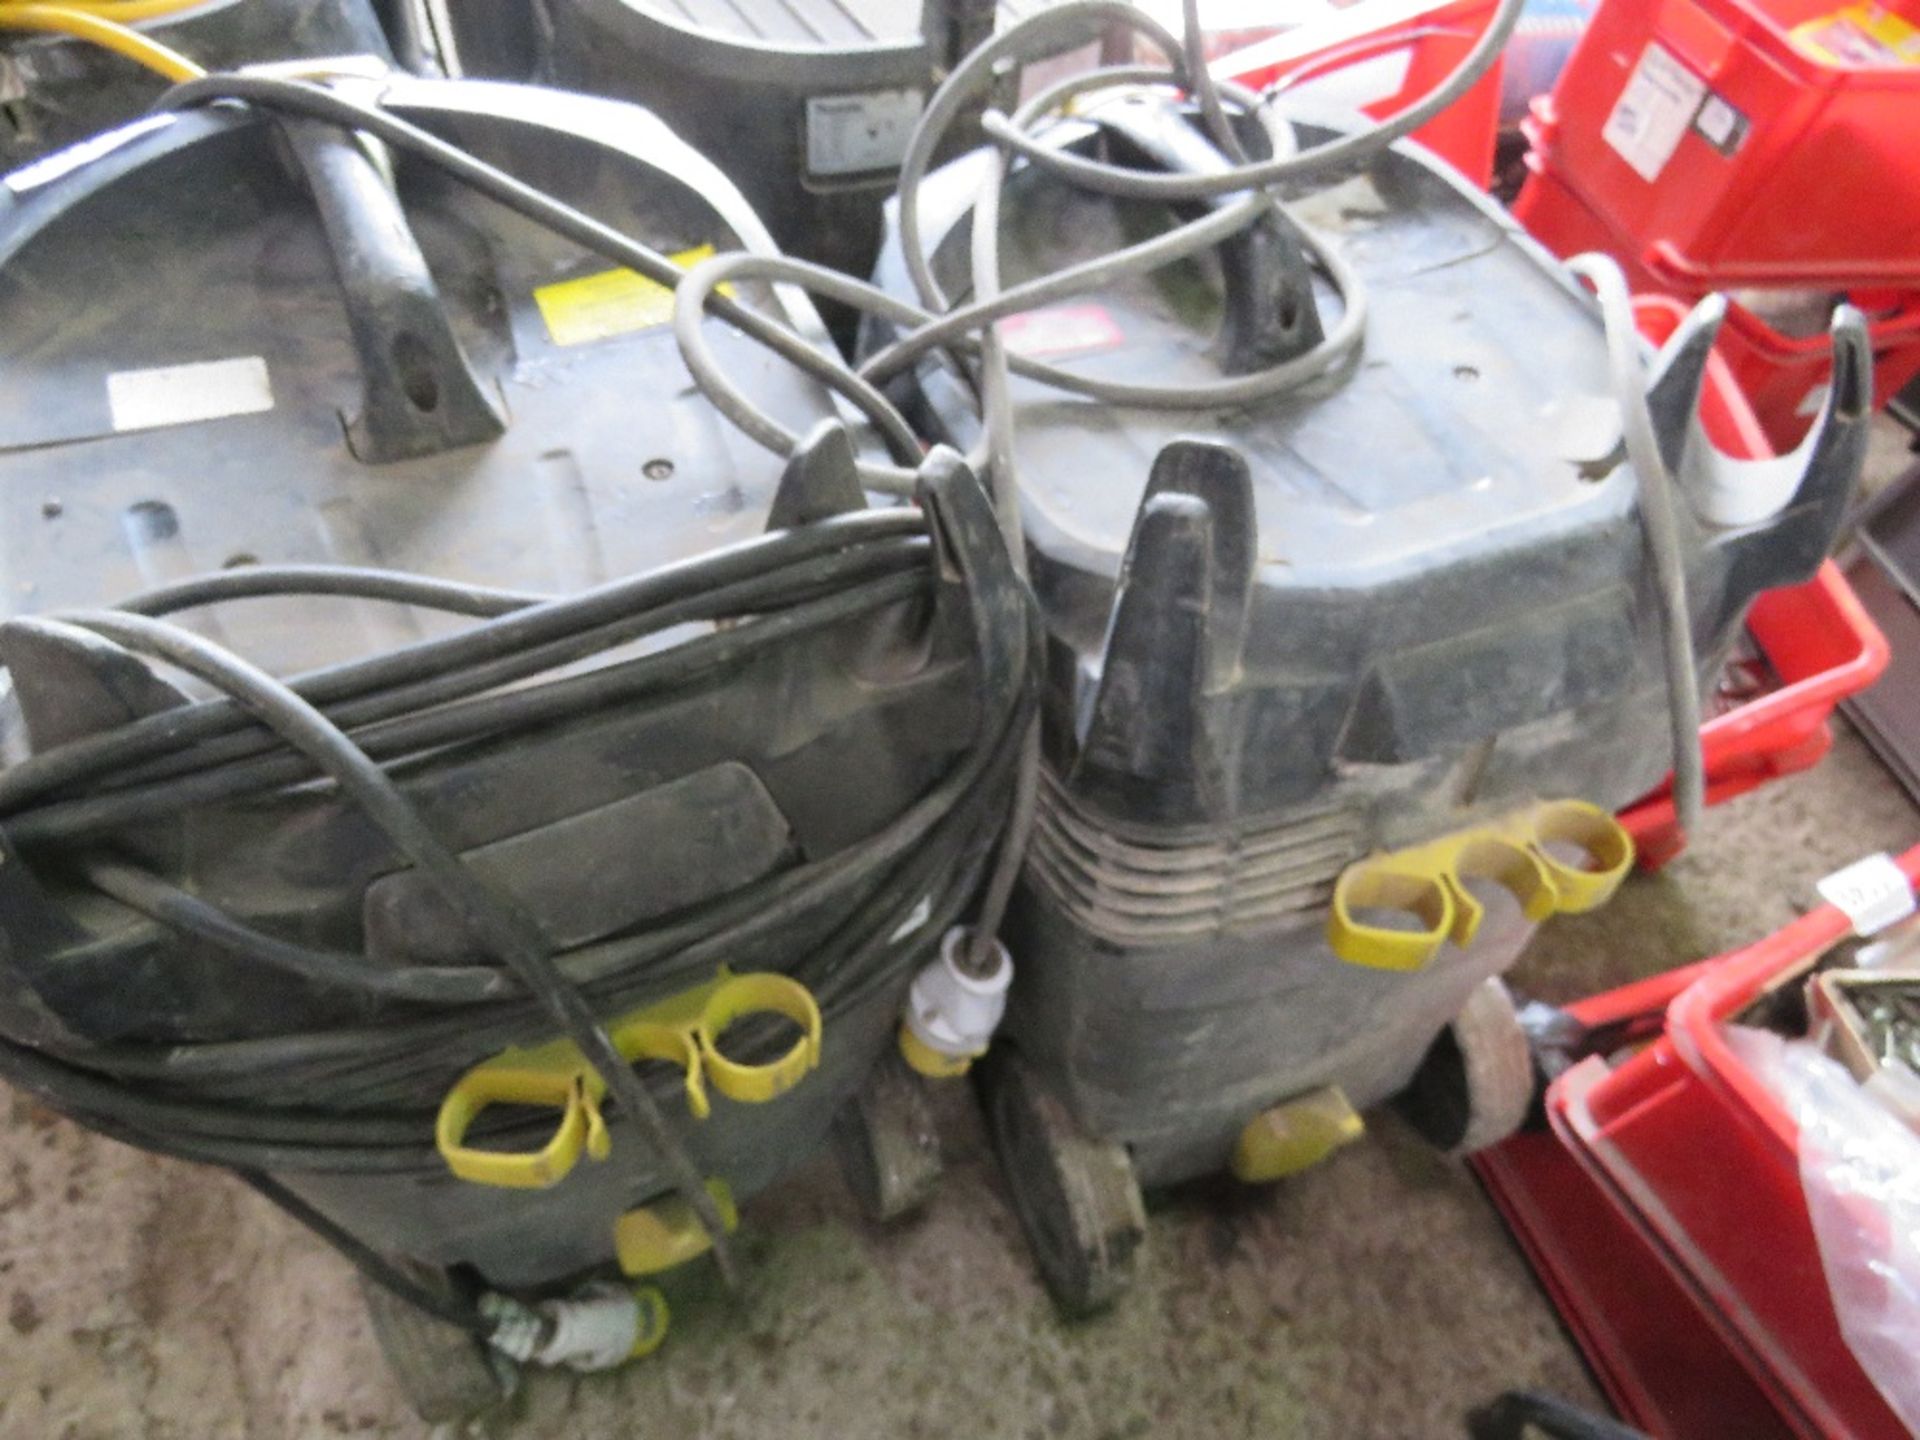 2 X LARGE 110VOLT POWERED VACUUMS. - Image 2 of 2